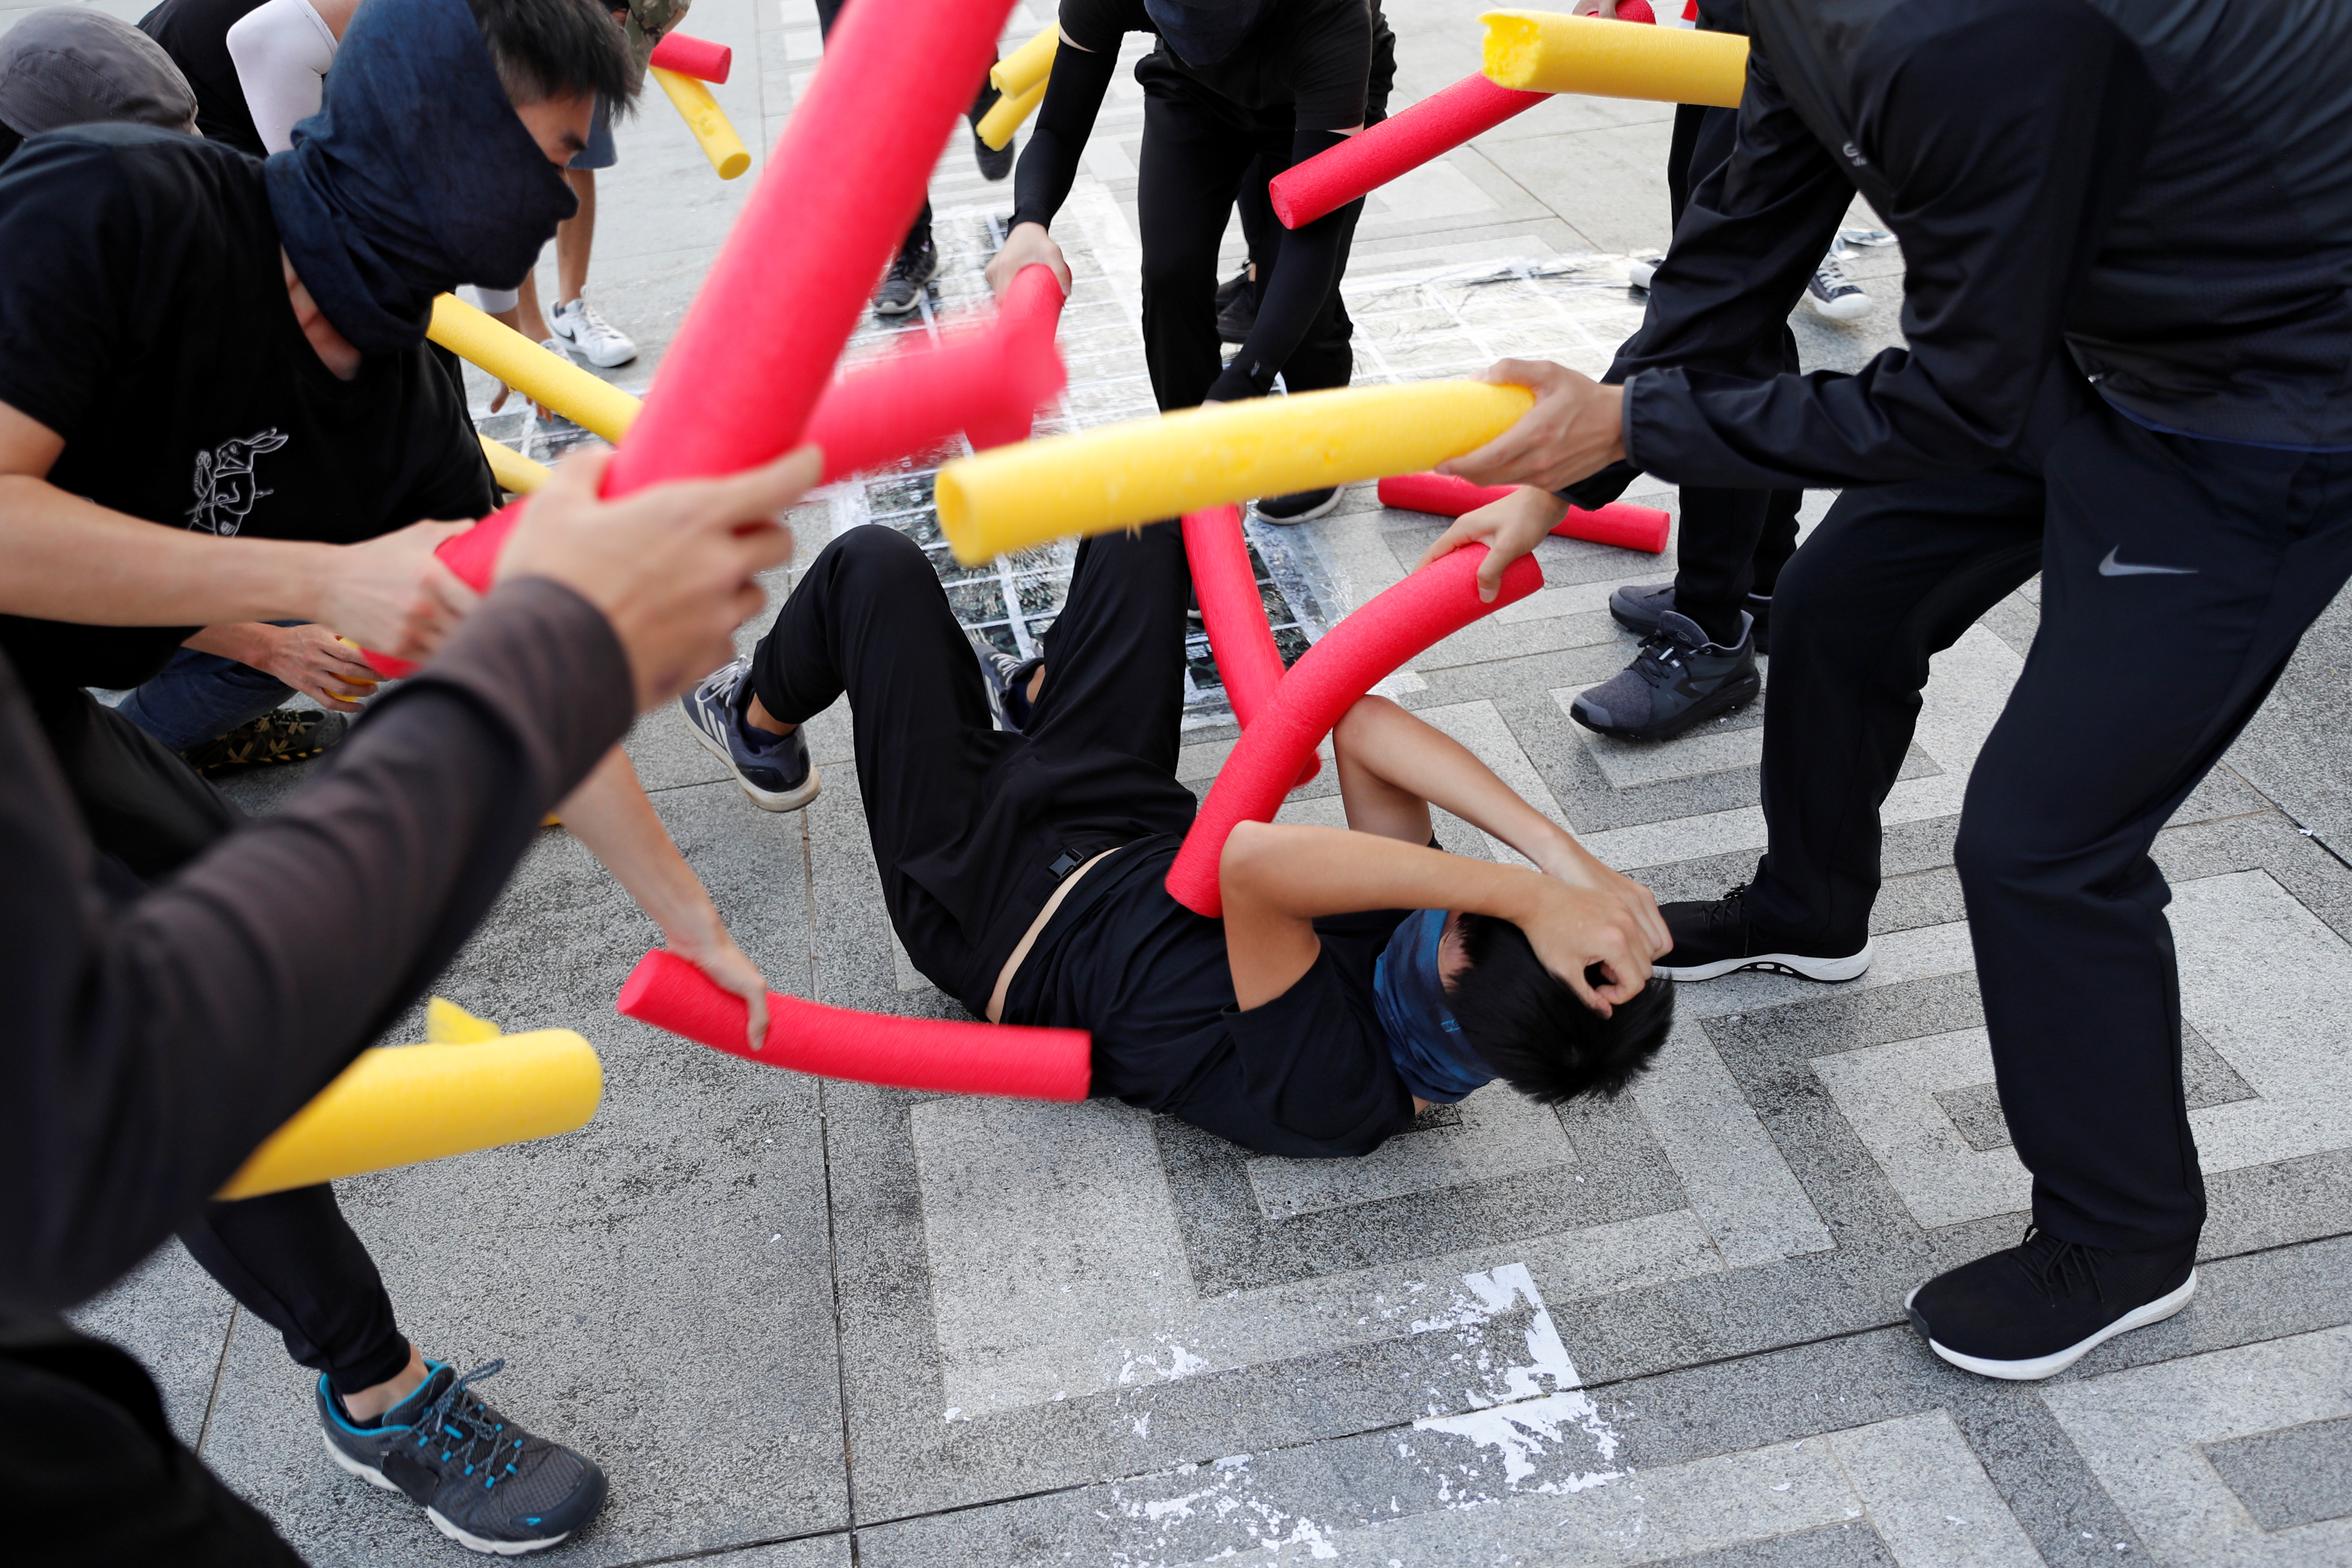 A participant is hit by others using foam sticks during a self-defence class organised by a student union at the Chinese University of Hong Kong October 15, 2019. u00e2u20acu201d Reuters pic